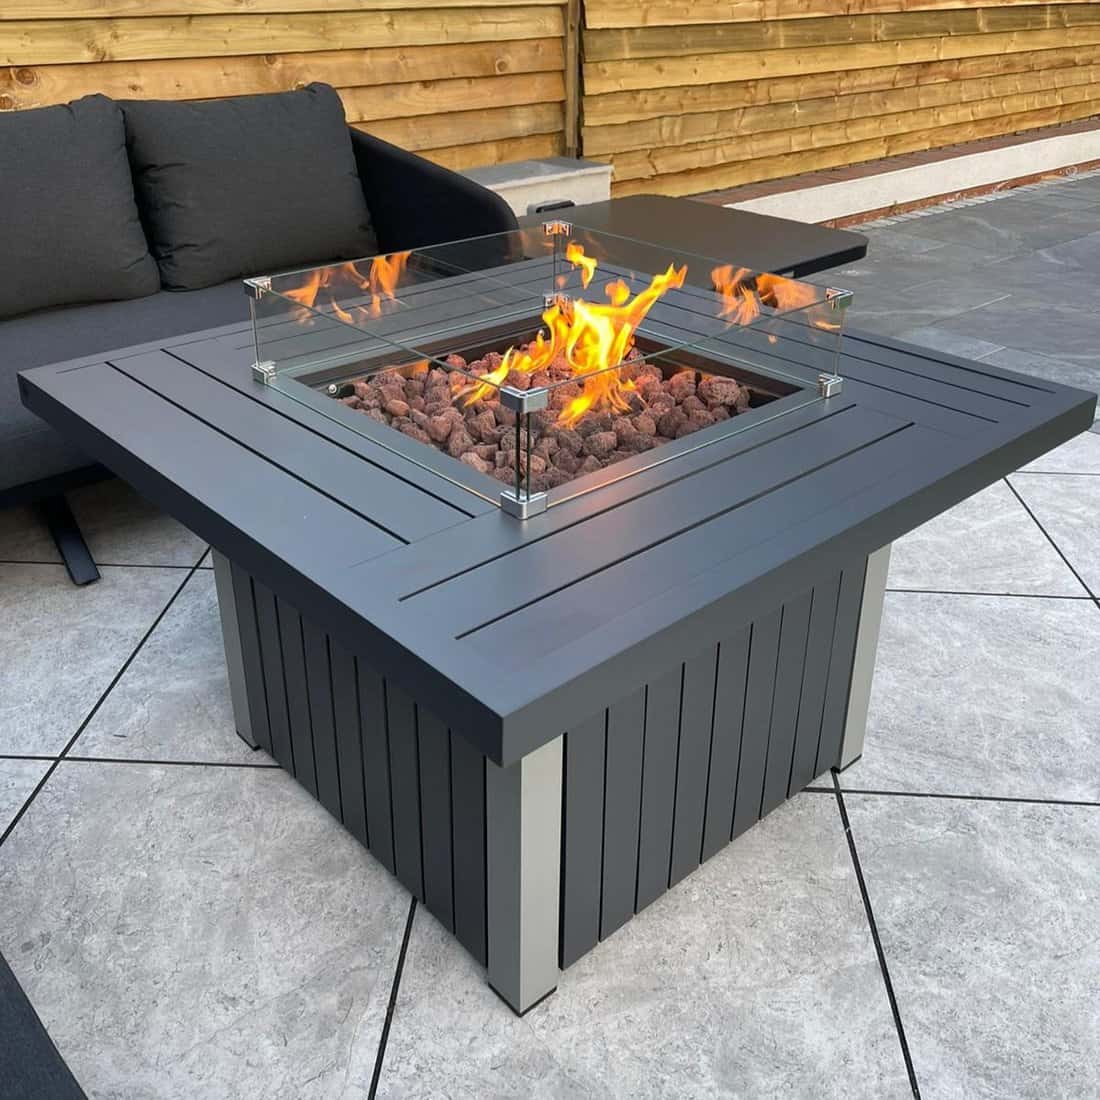 Furniture cover for Charley Aluminium Standalone Fire Pit.